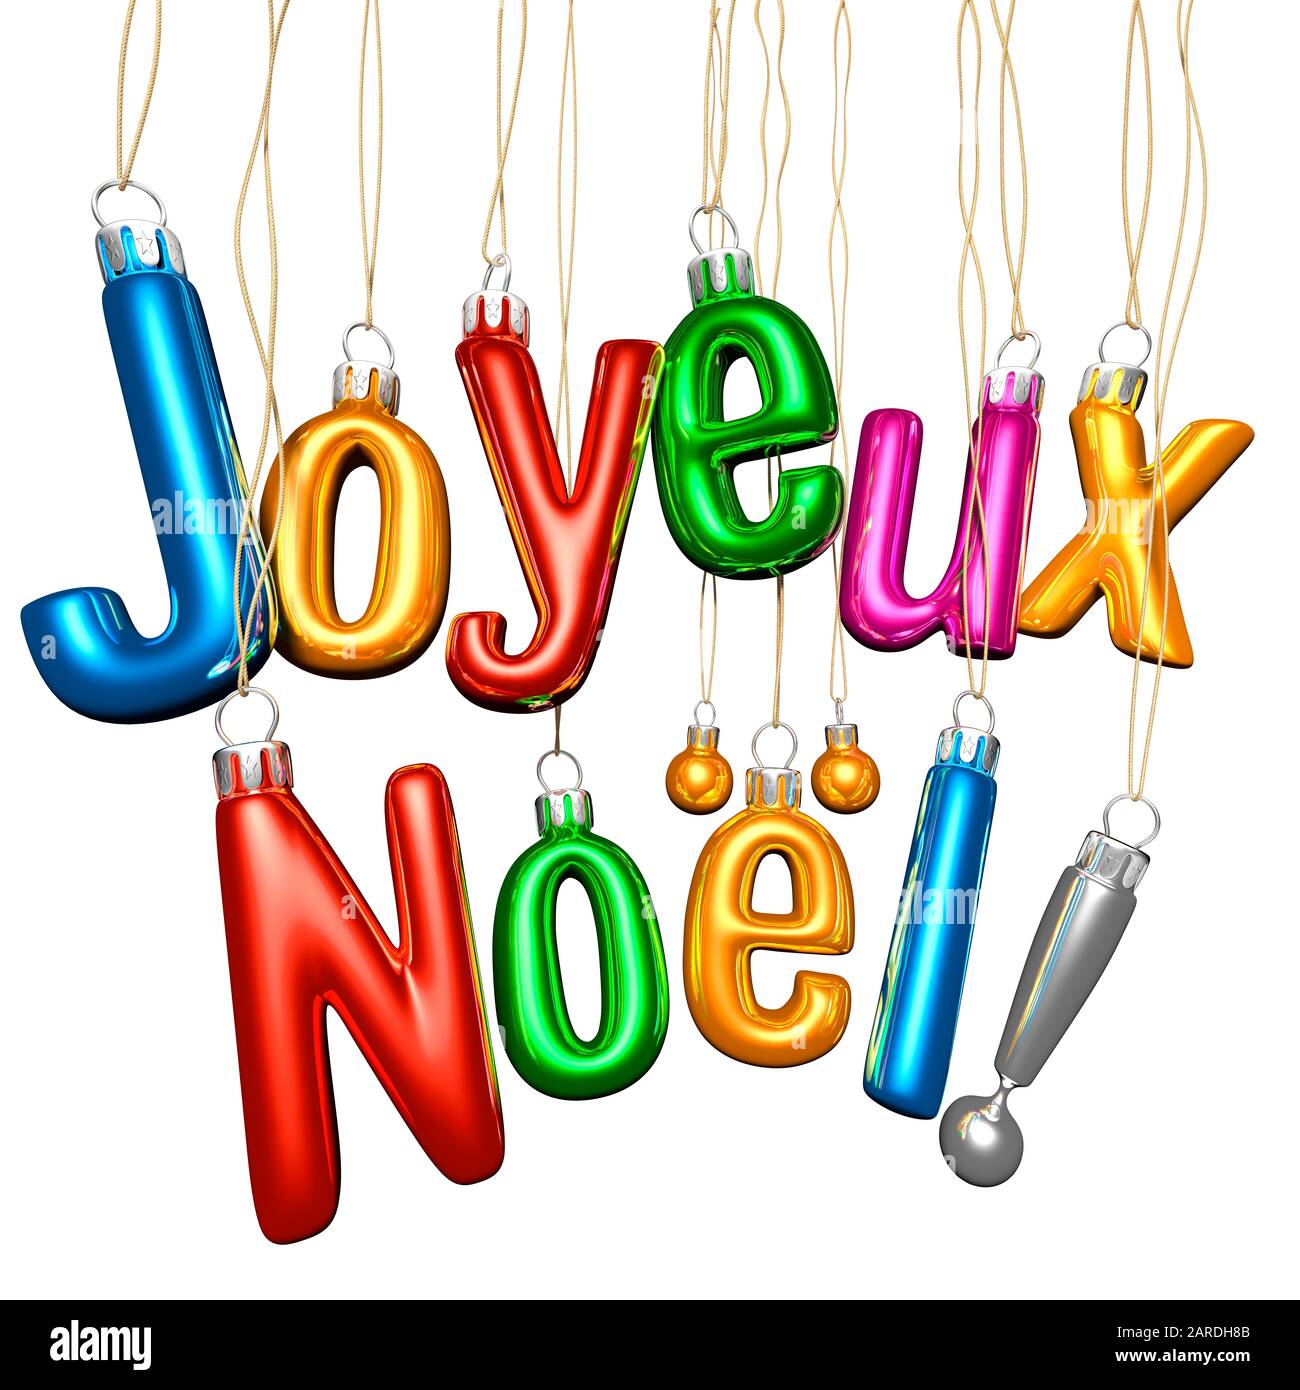 Joyeux Noel. Christmas Typography. Glass baubles on a white background. Greeting. French Stock Photo